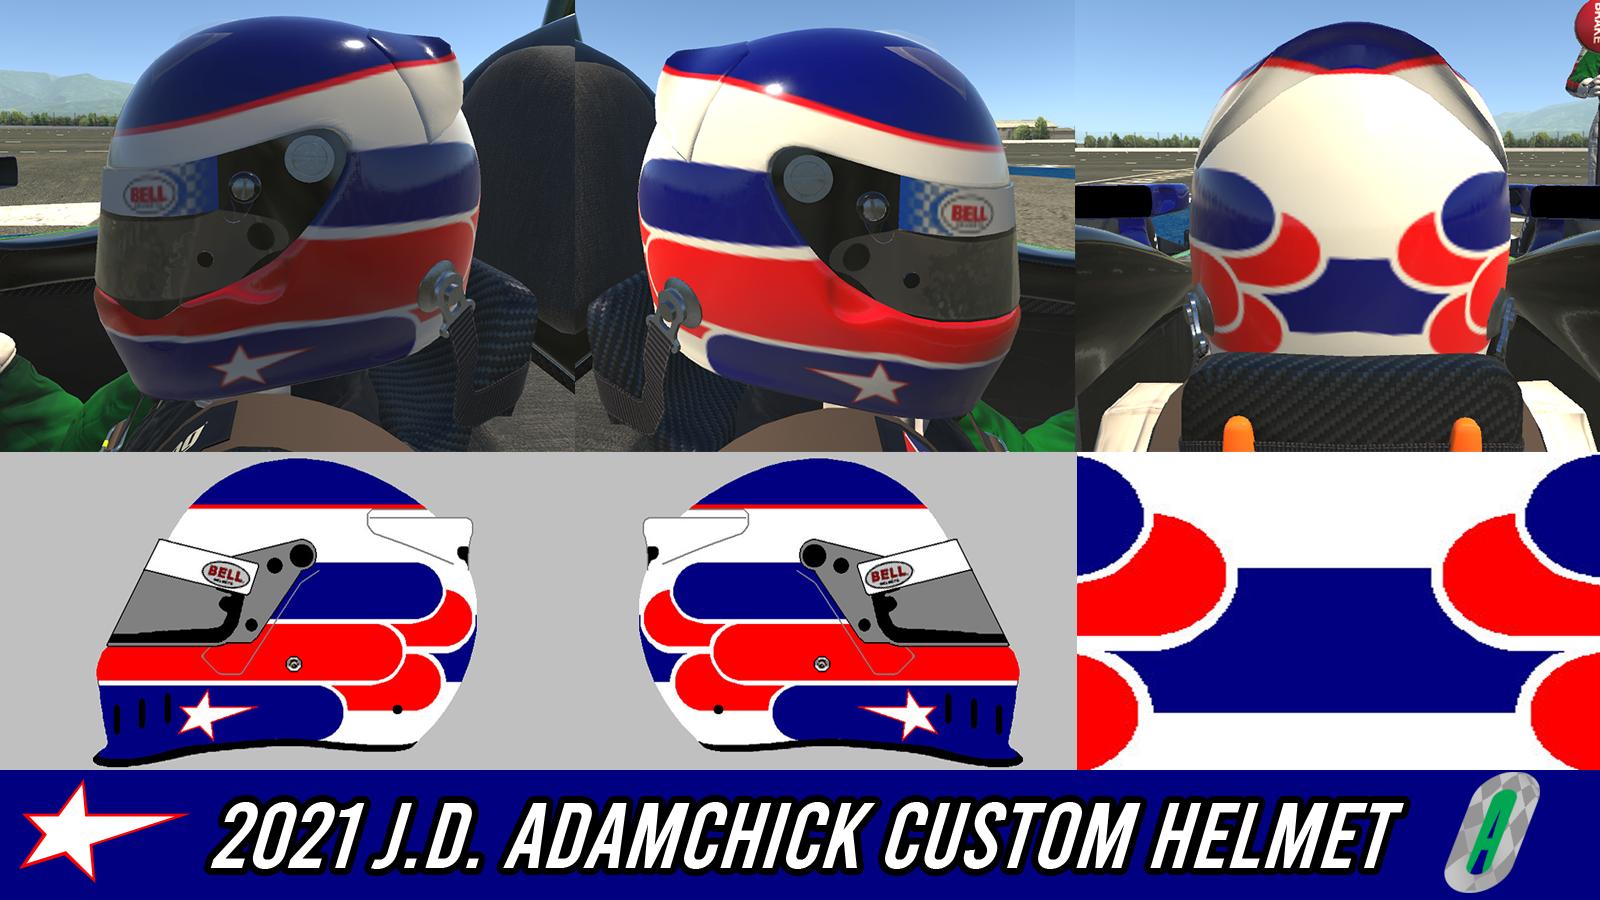 Preview of 2021 J.D. Adamchick Helmet by Aly Osman